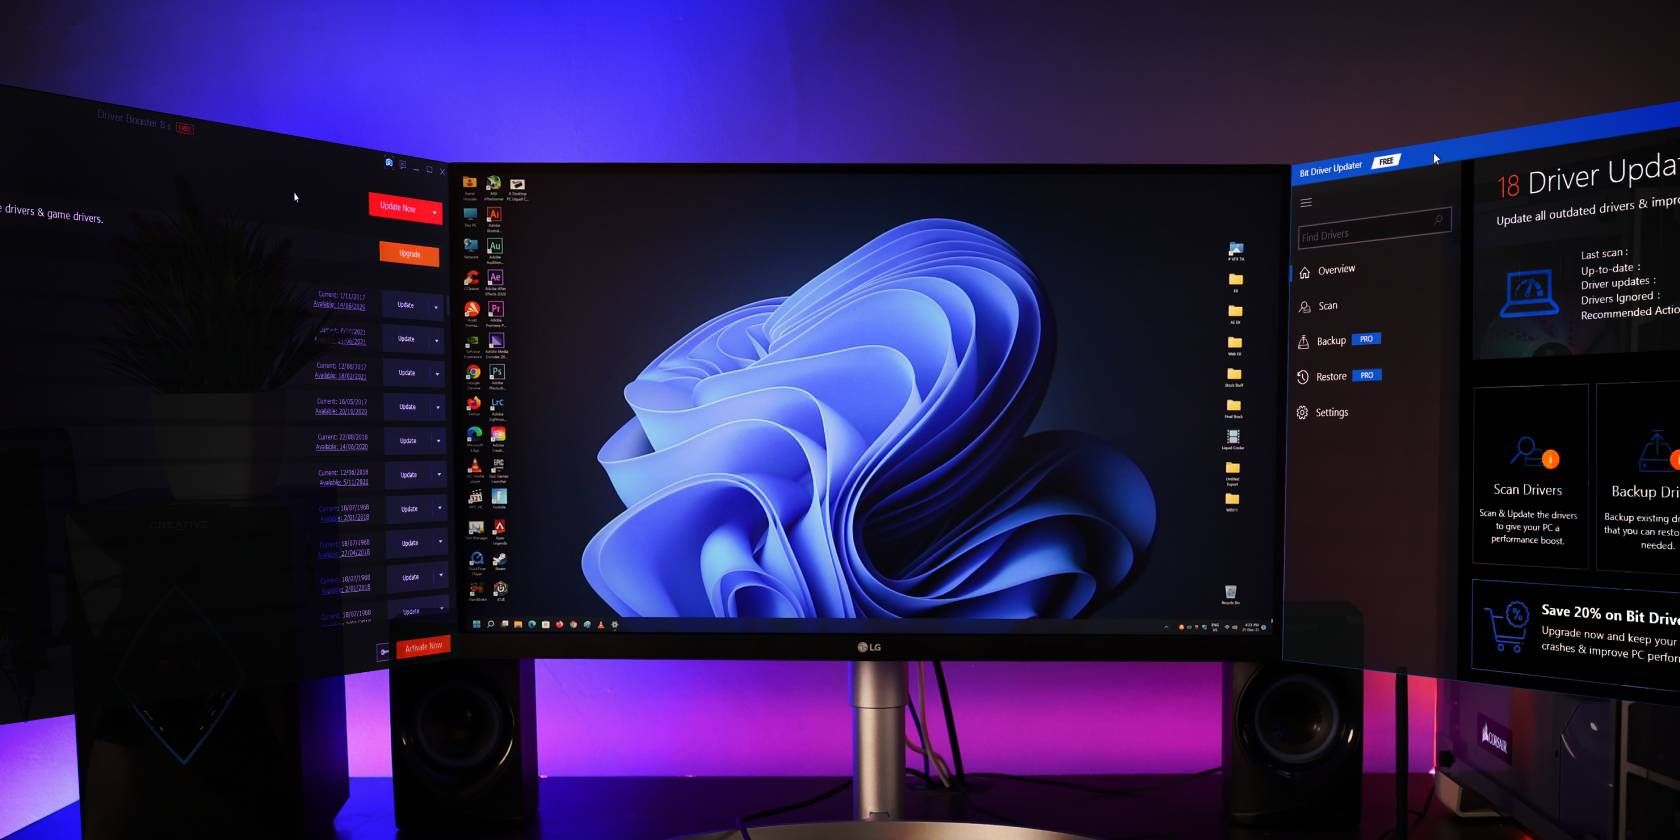 Monitor setup with Windows 11 wallpaper, featuring driver interface on the left and a driver update screen on the right.